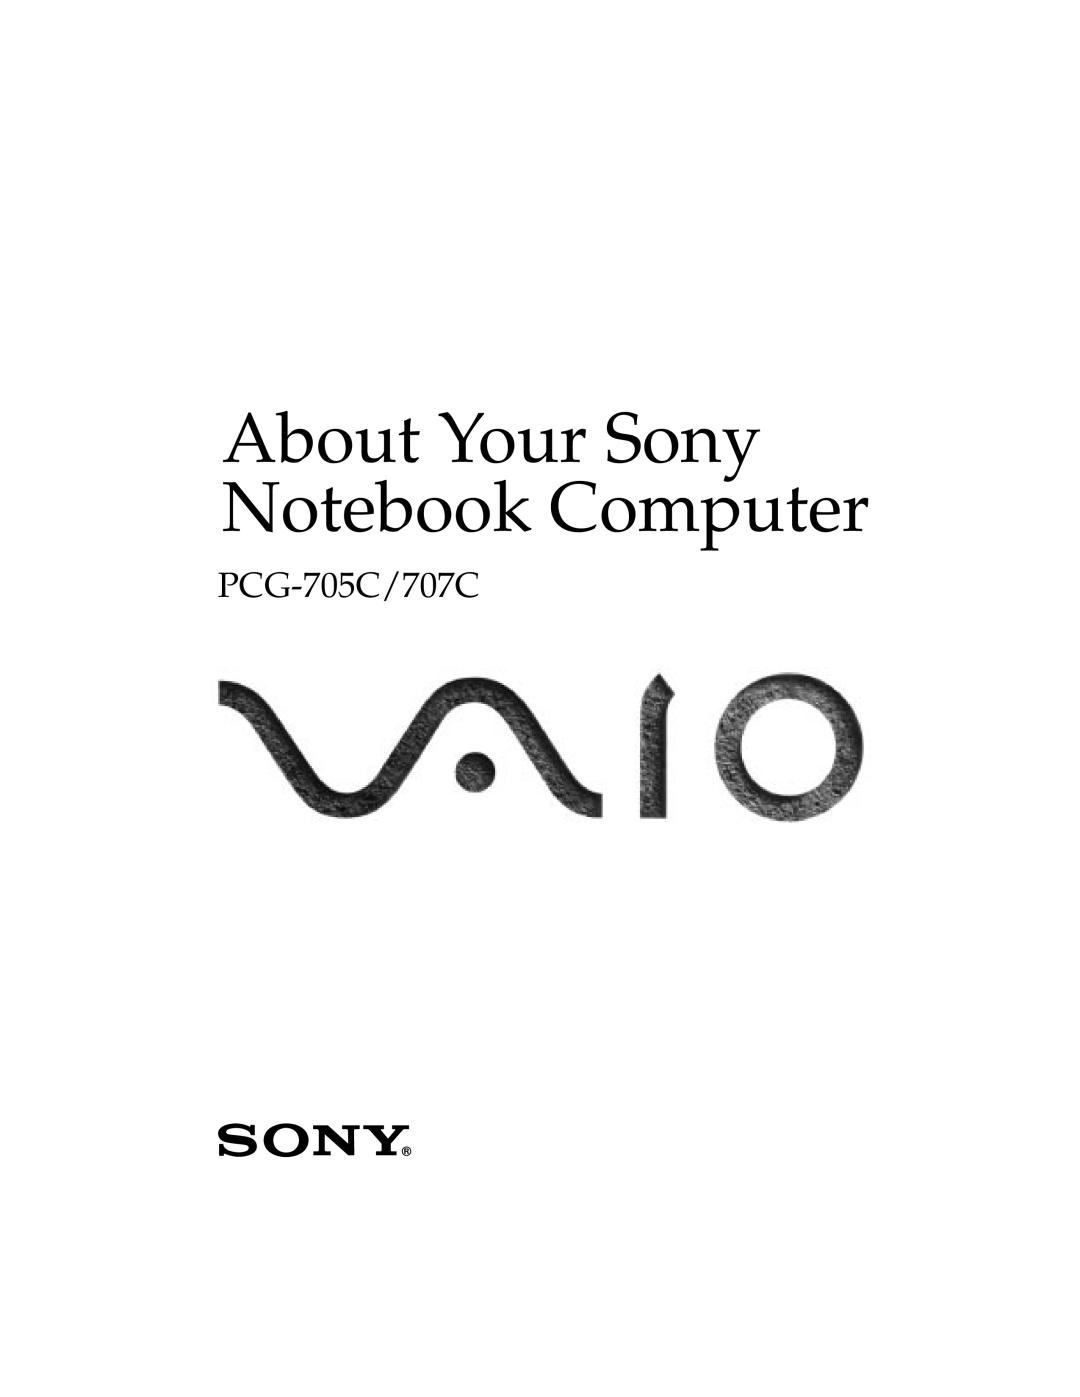 Sony PCG705C manual About Your Sony Notebook Computer, PCG-705C/707C 